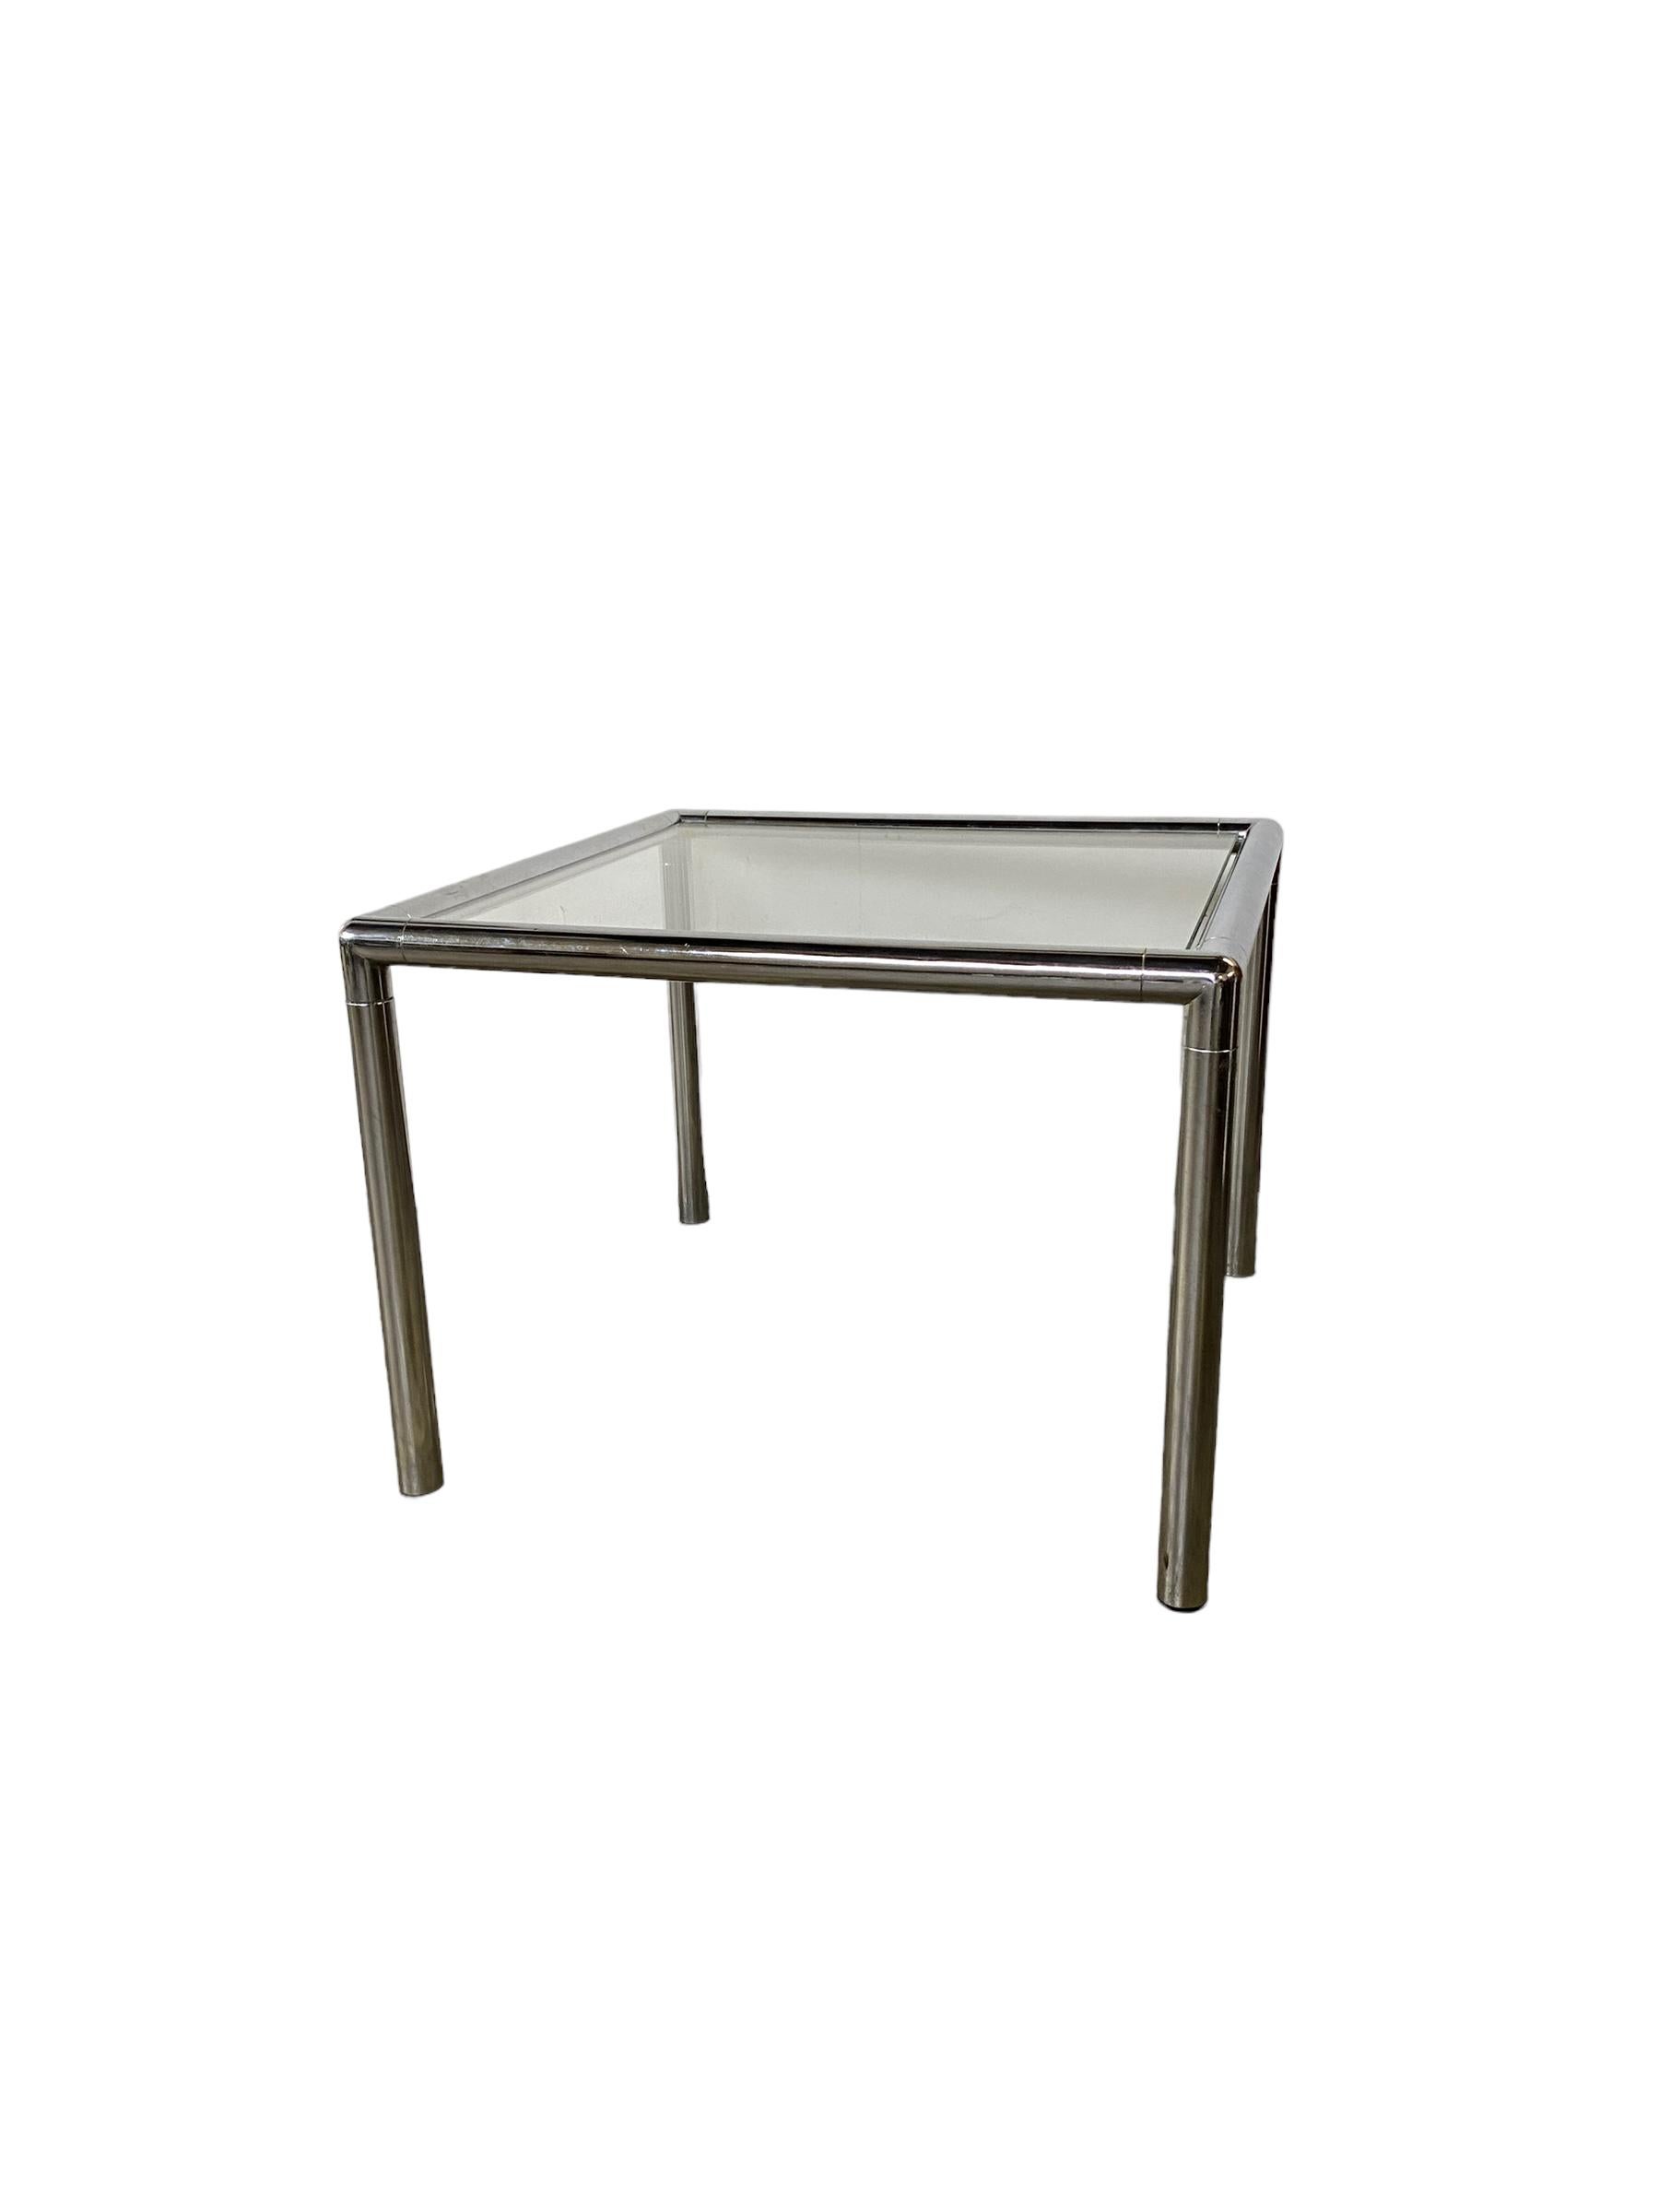 American Pair of Chrome Tube End Tables For Sale